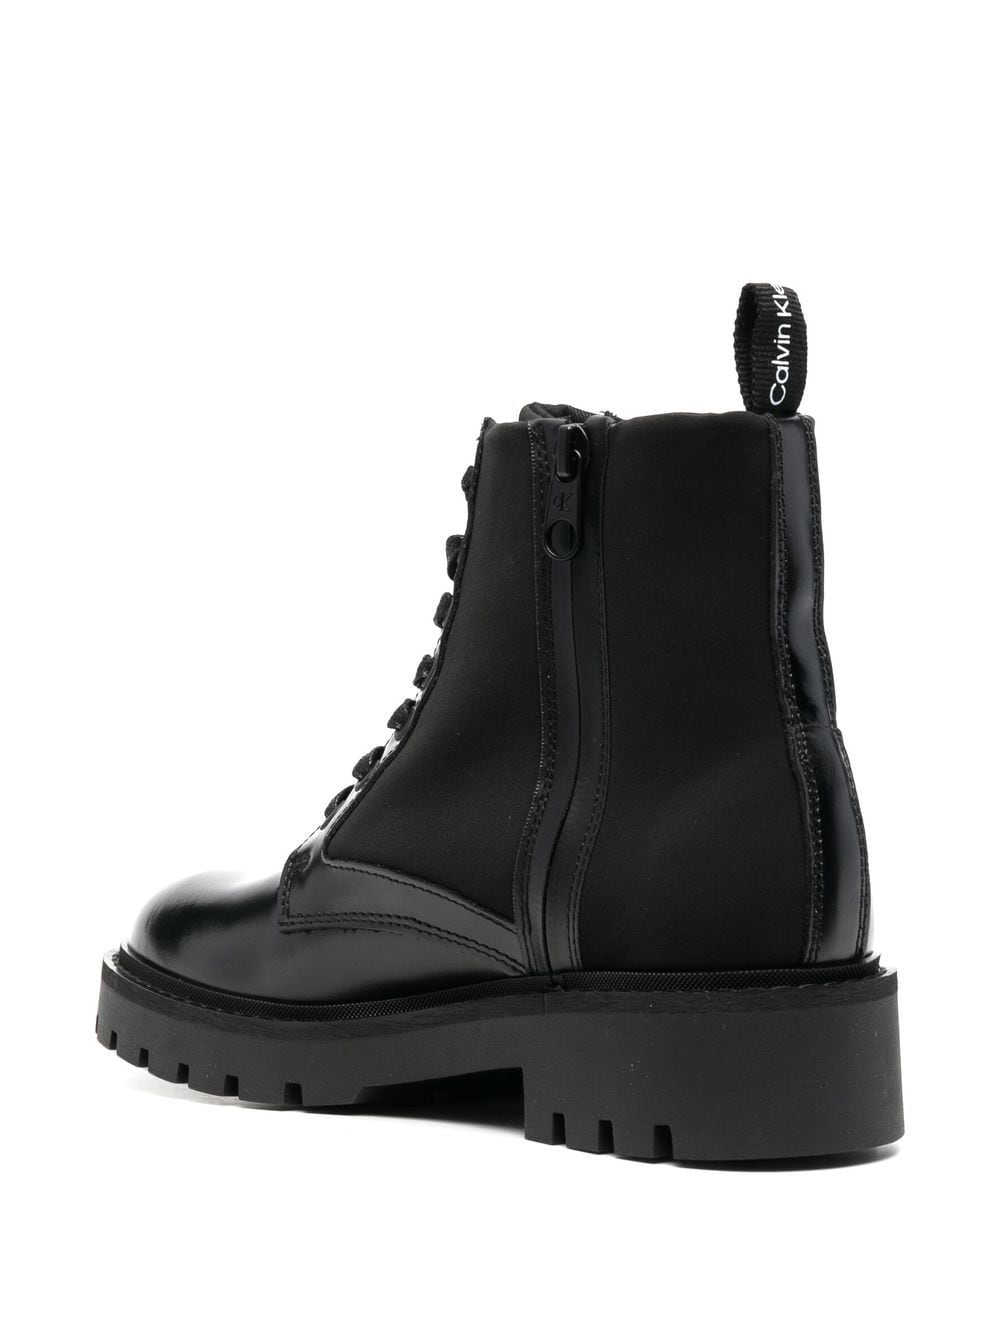 Calvin Klein Military Ankle Boots - Farfetch